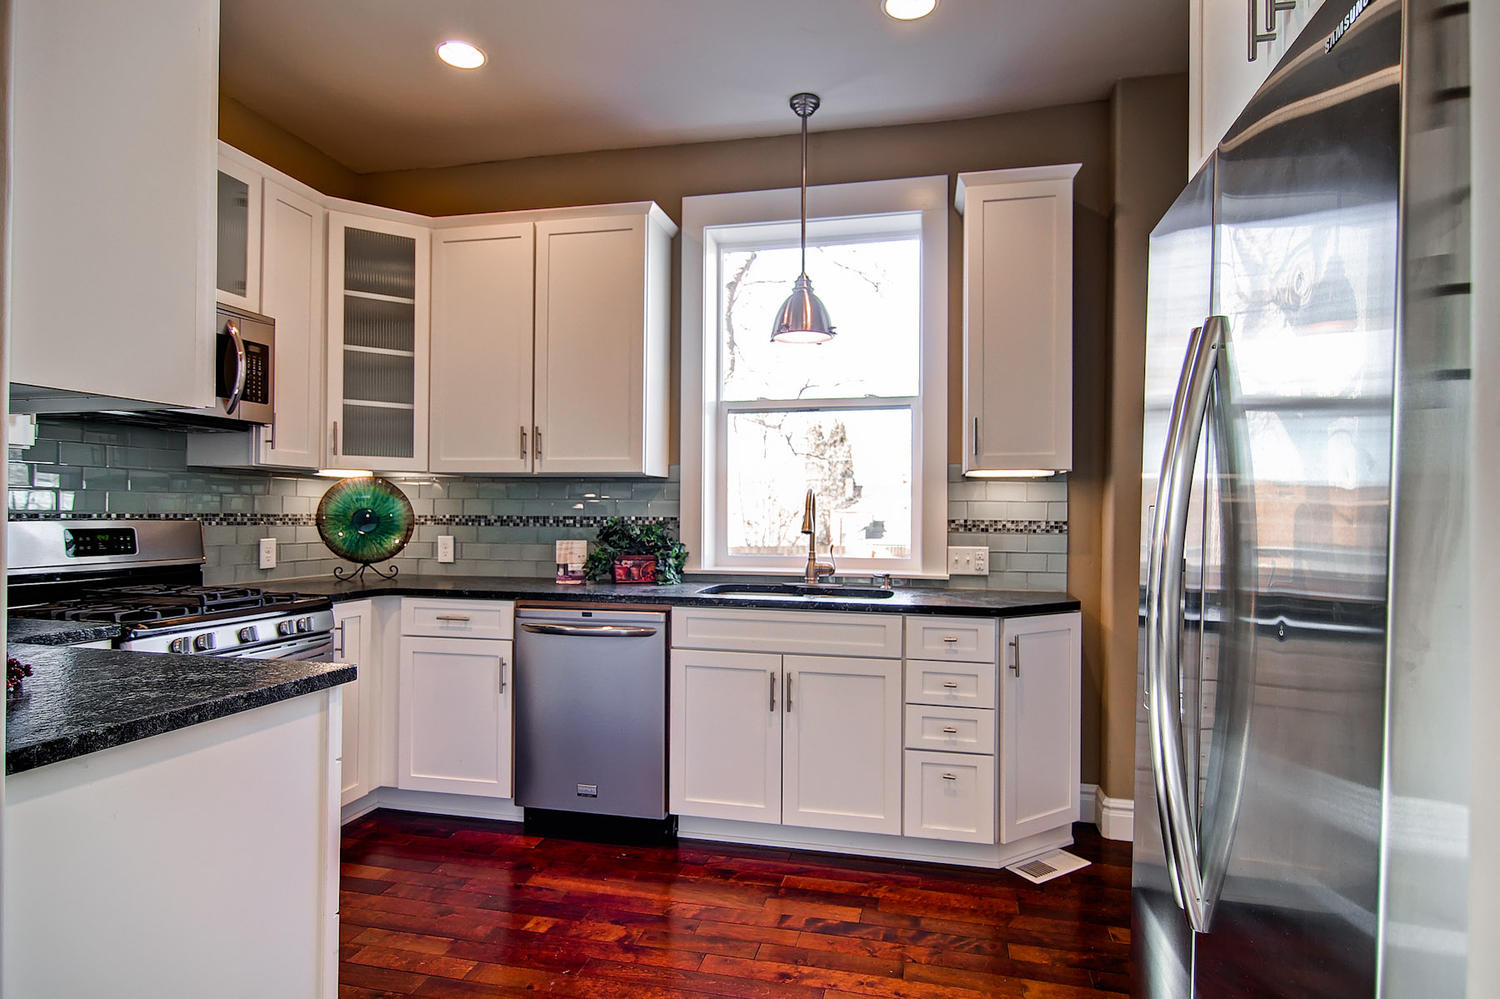 Interior Kitchen residential townhouse multi-family Real estate Projects - Weins Development Group - Award-winning real estate developers in Denver, Colorado. Top #1 of Builders producing high-quality townhomes, condos, apartments, retail, & office projects